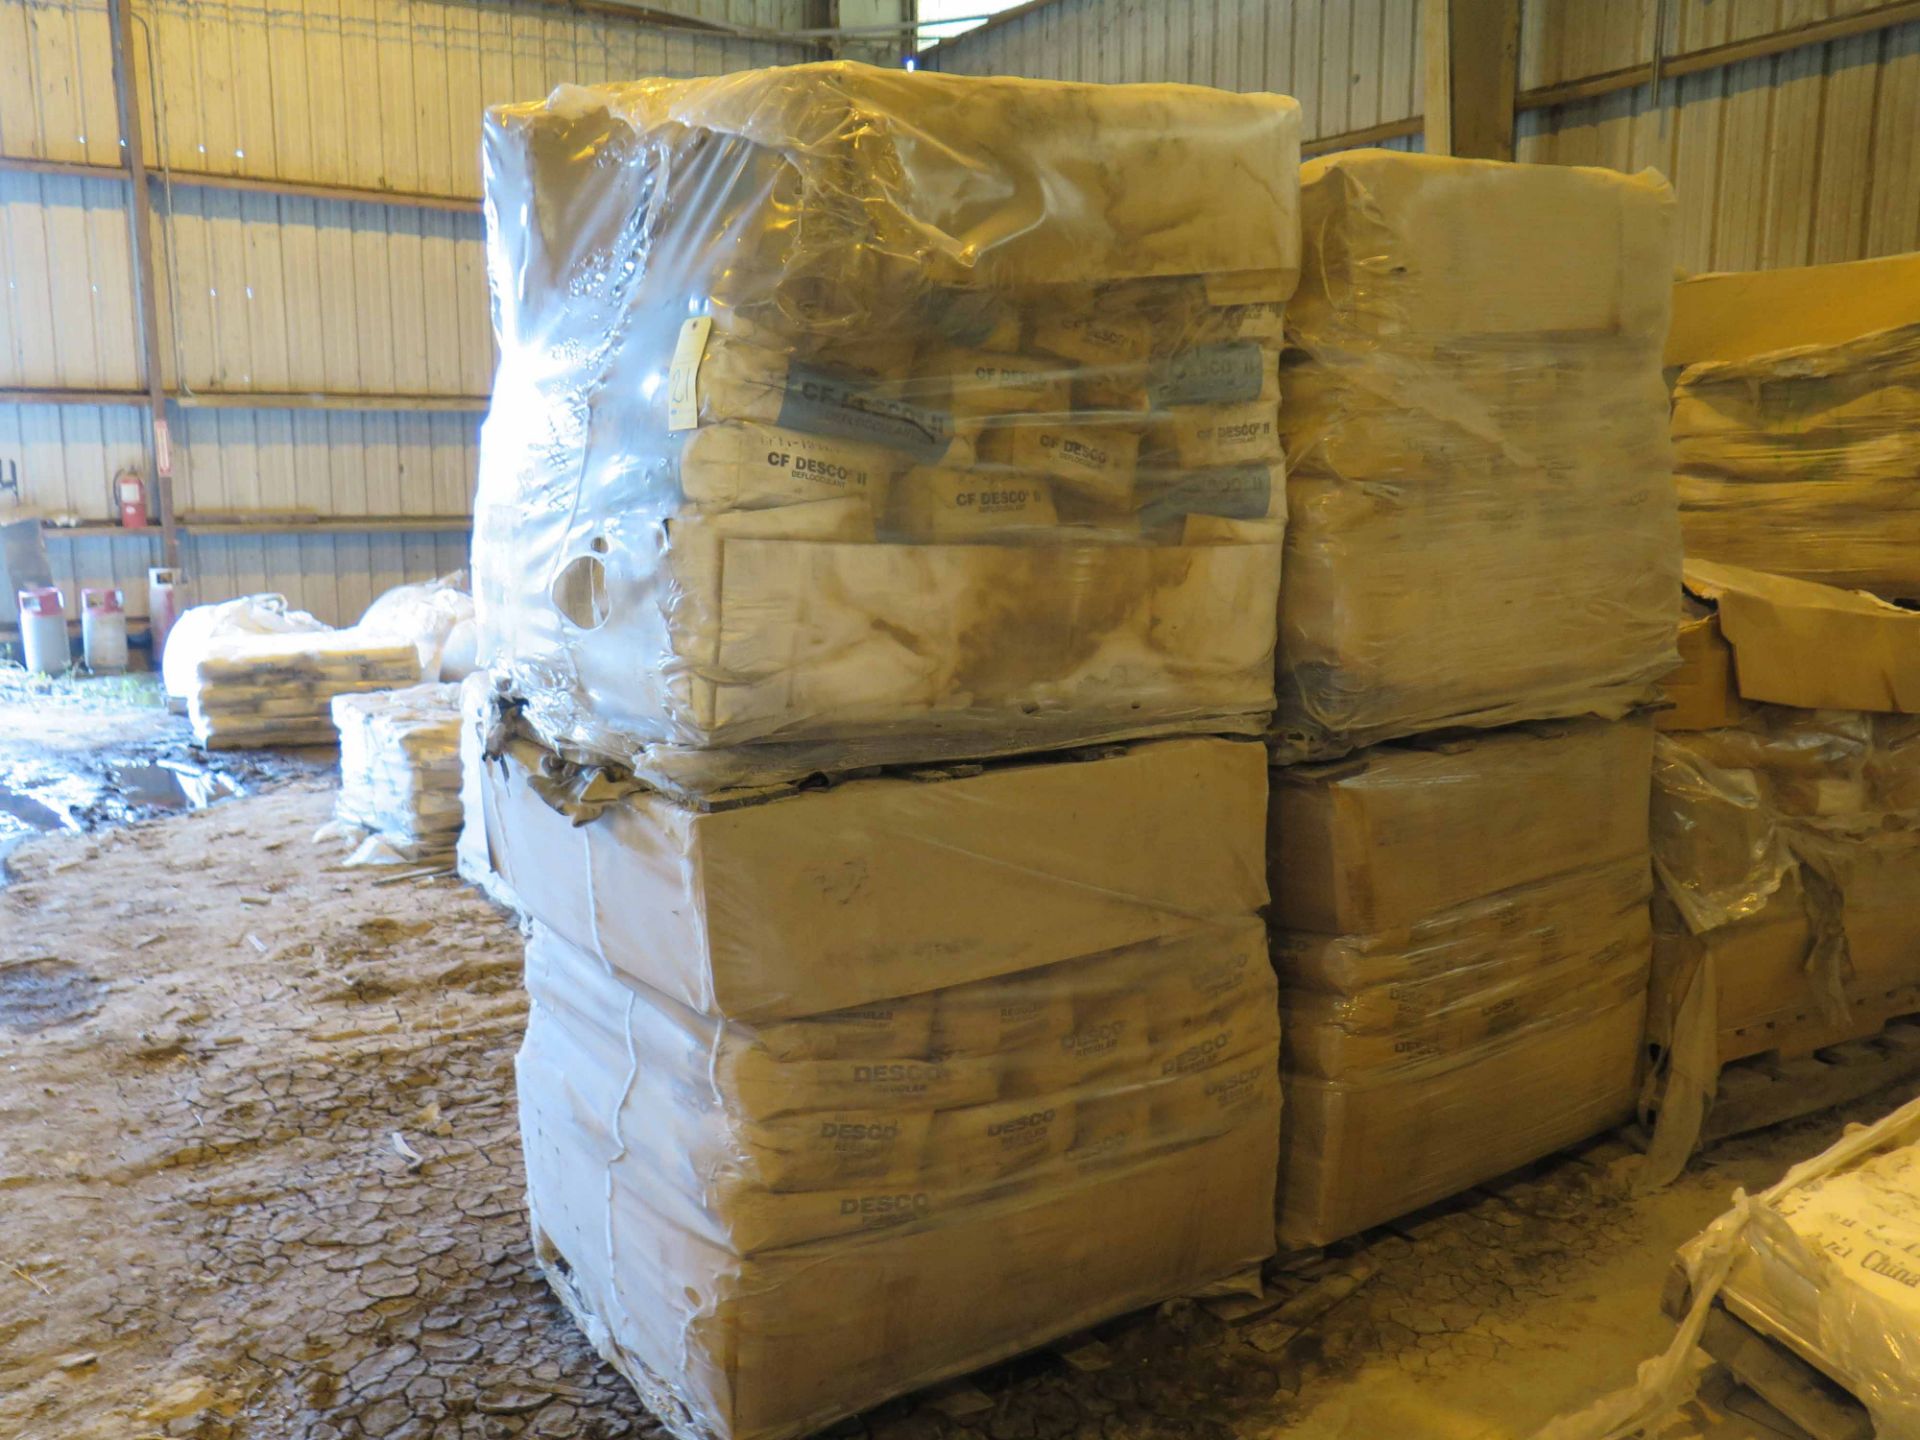 LOT OF DESCO (approx. 319 bags) (Location #1: 374 Walter White Road, Trinity, TX 75862)